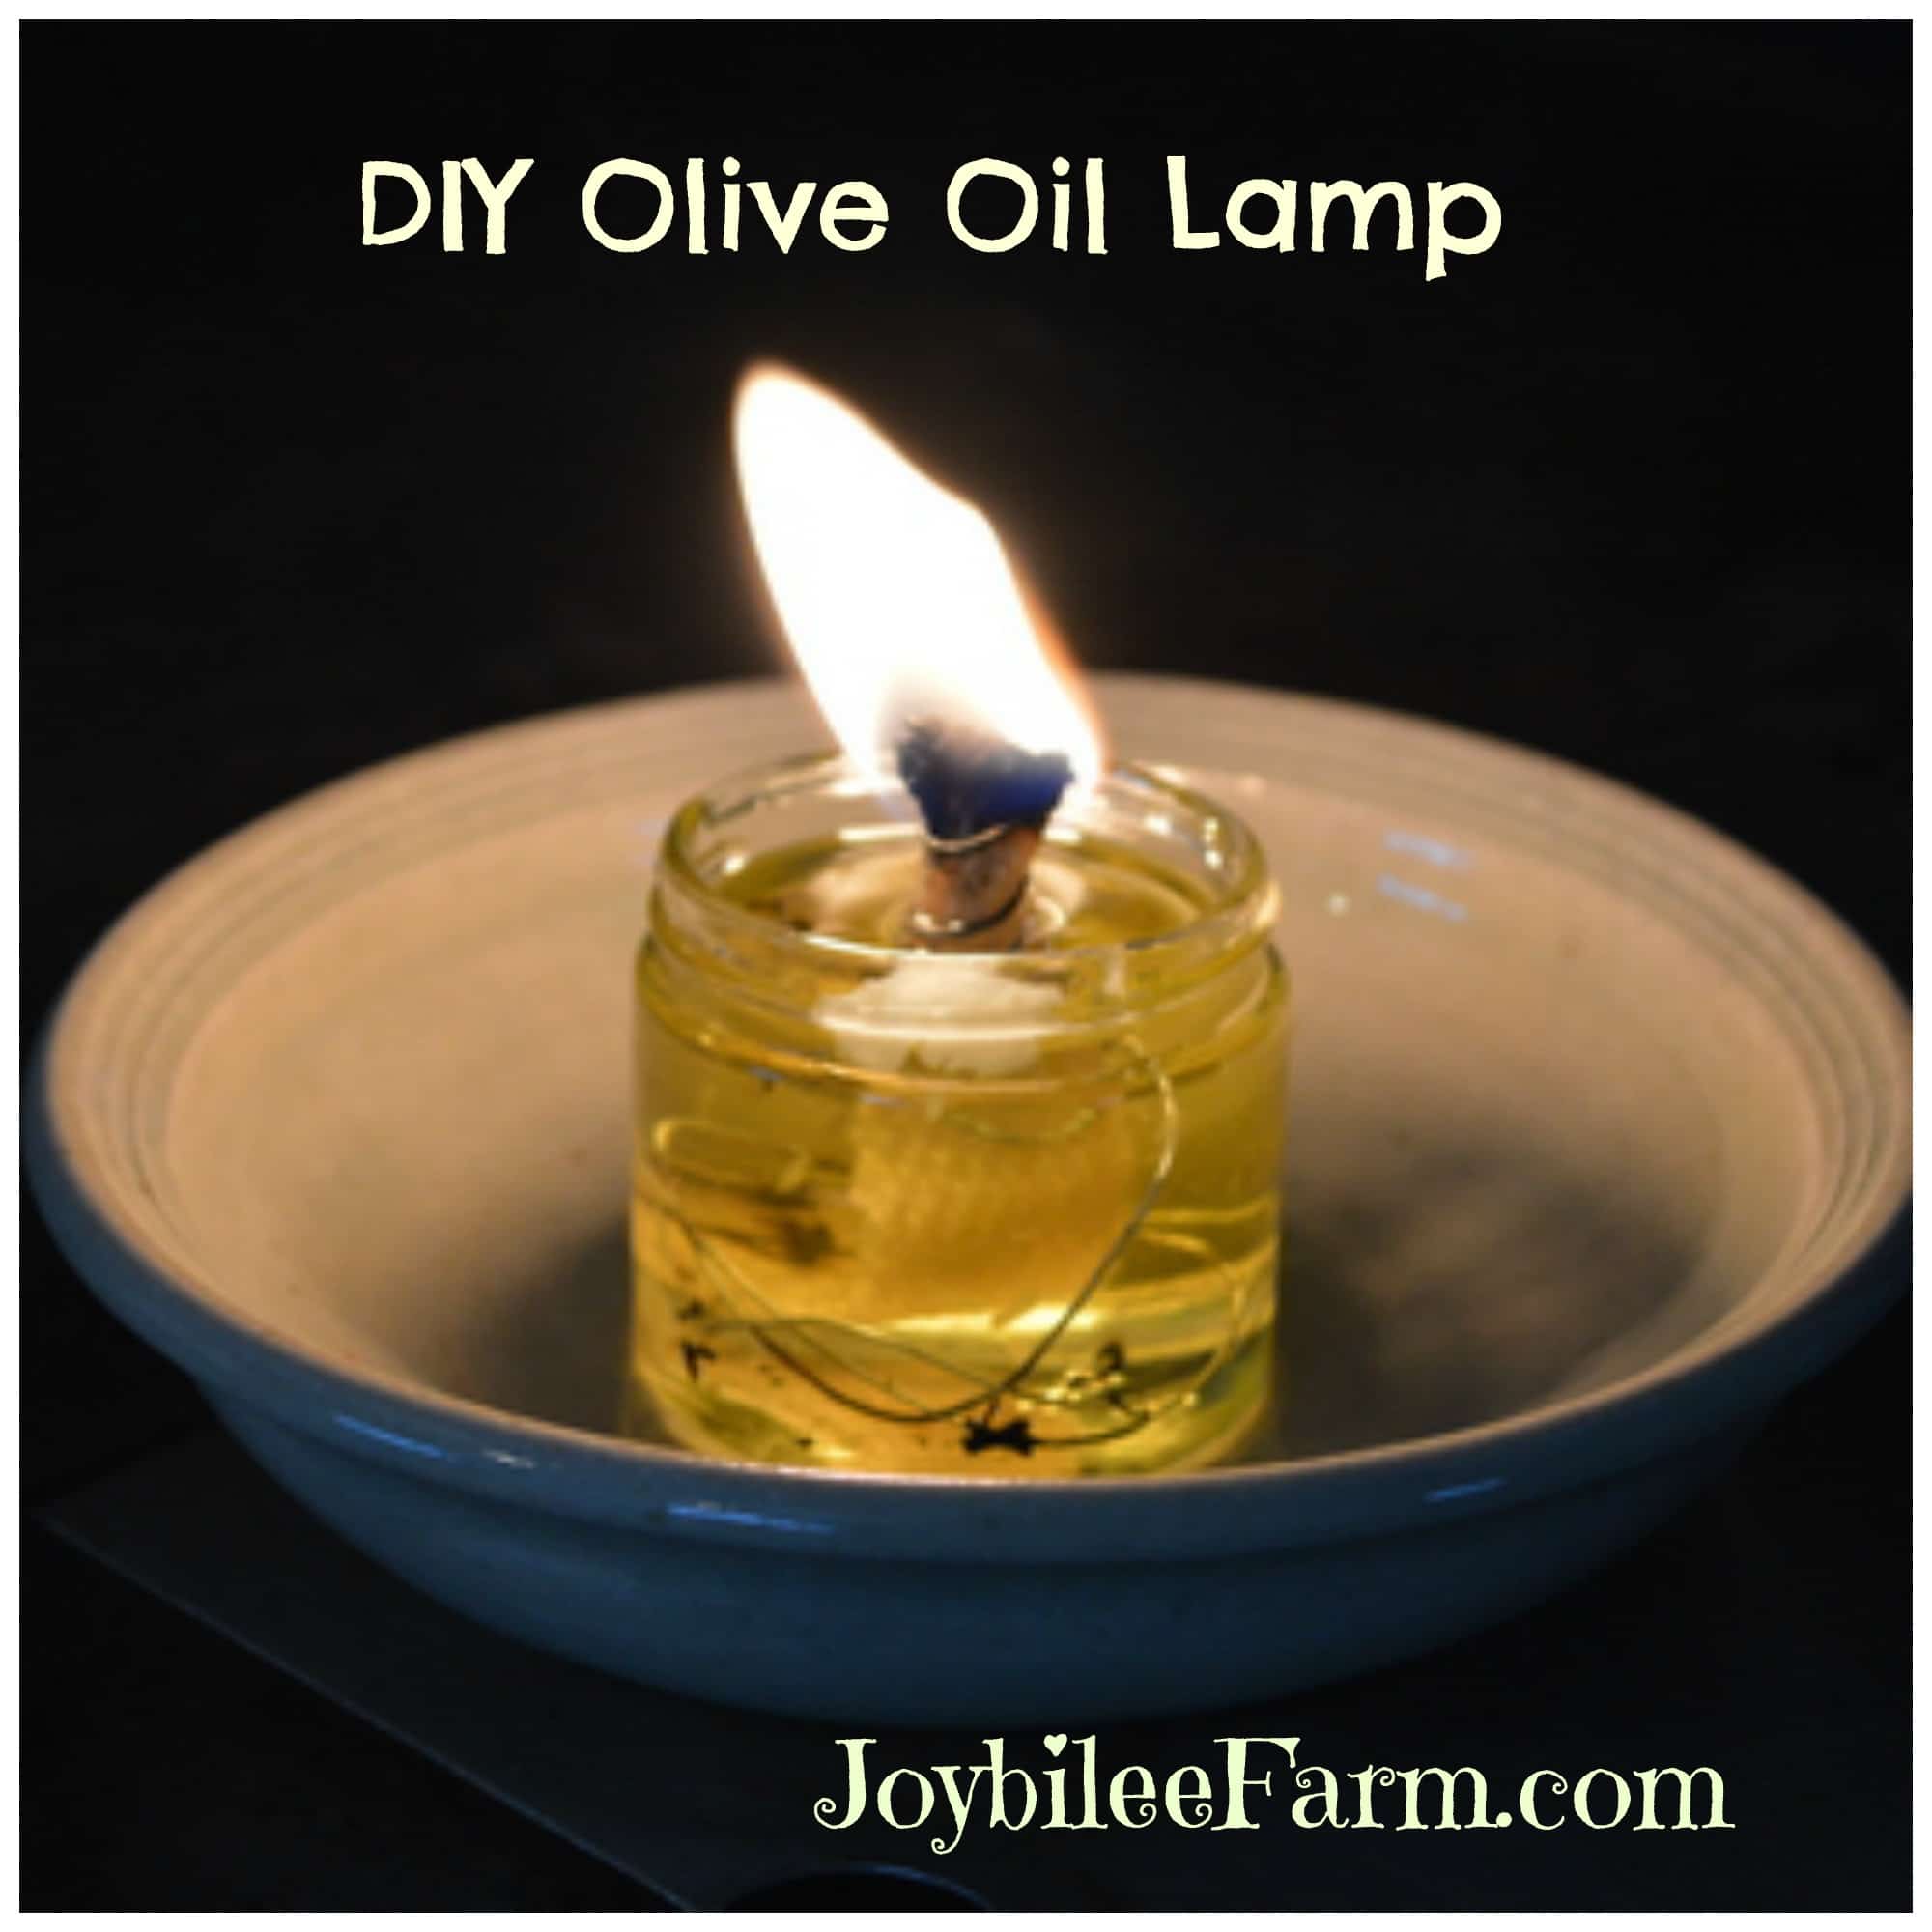 DIY Olive Oil Lamp, the lost art you need to know -